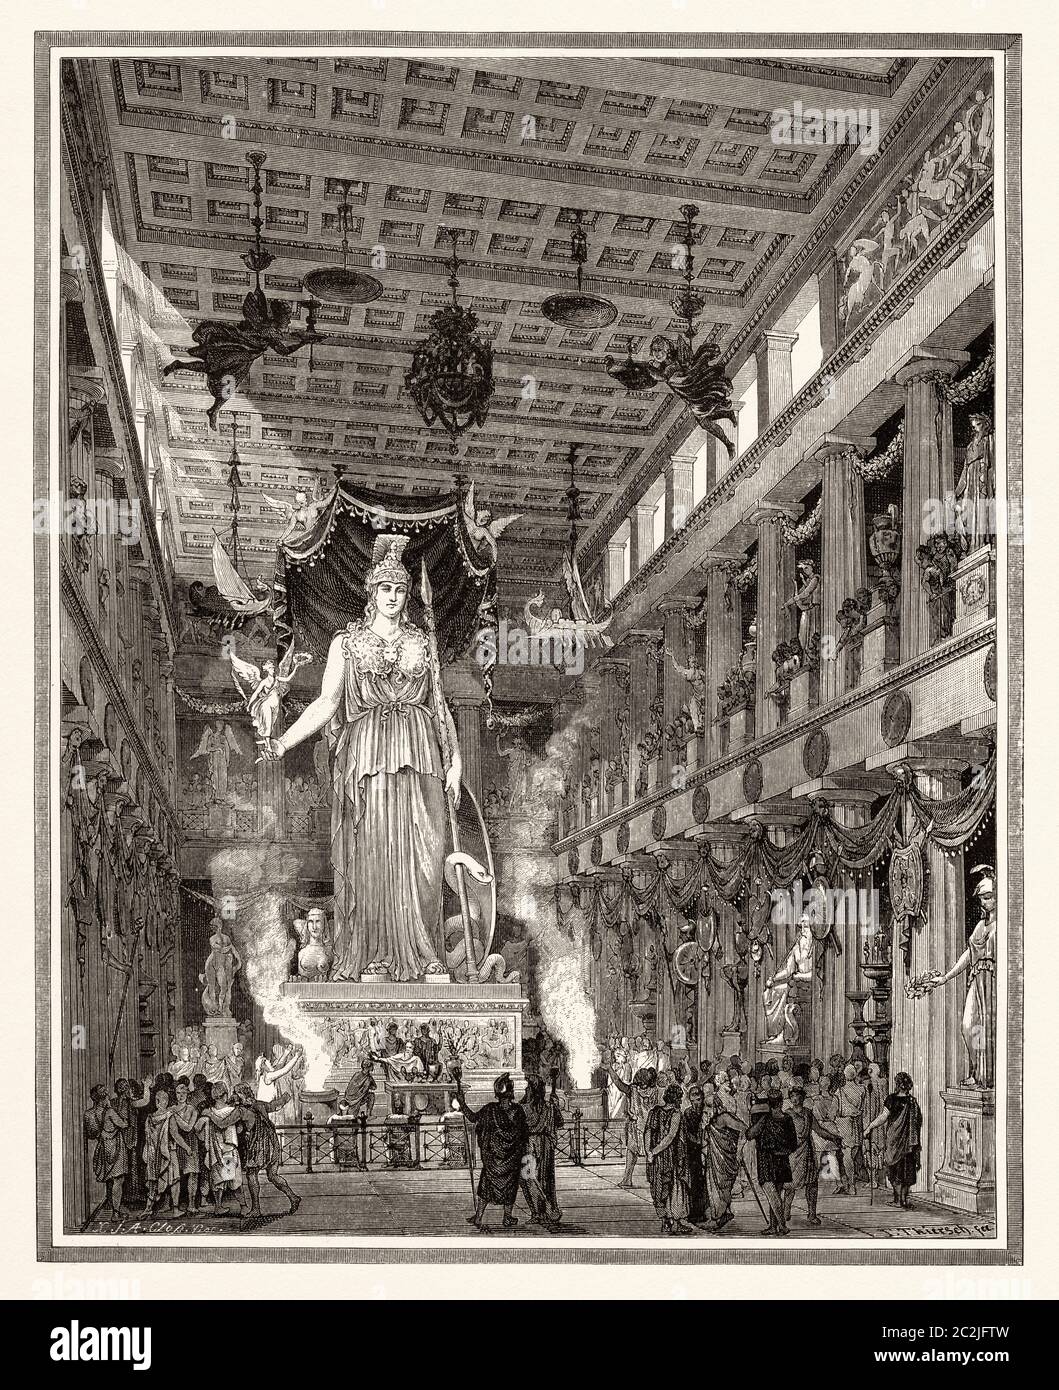 Artistic recreation of the Parthenon during the Classical period Statue of the Goddess Athena. Athens. Ancient Greece. Old 19th century engraved illustration, El Mundo Ilustrado 1880 Stock Photo